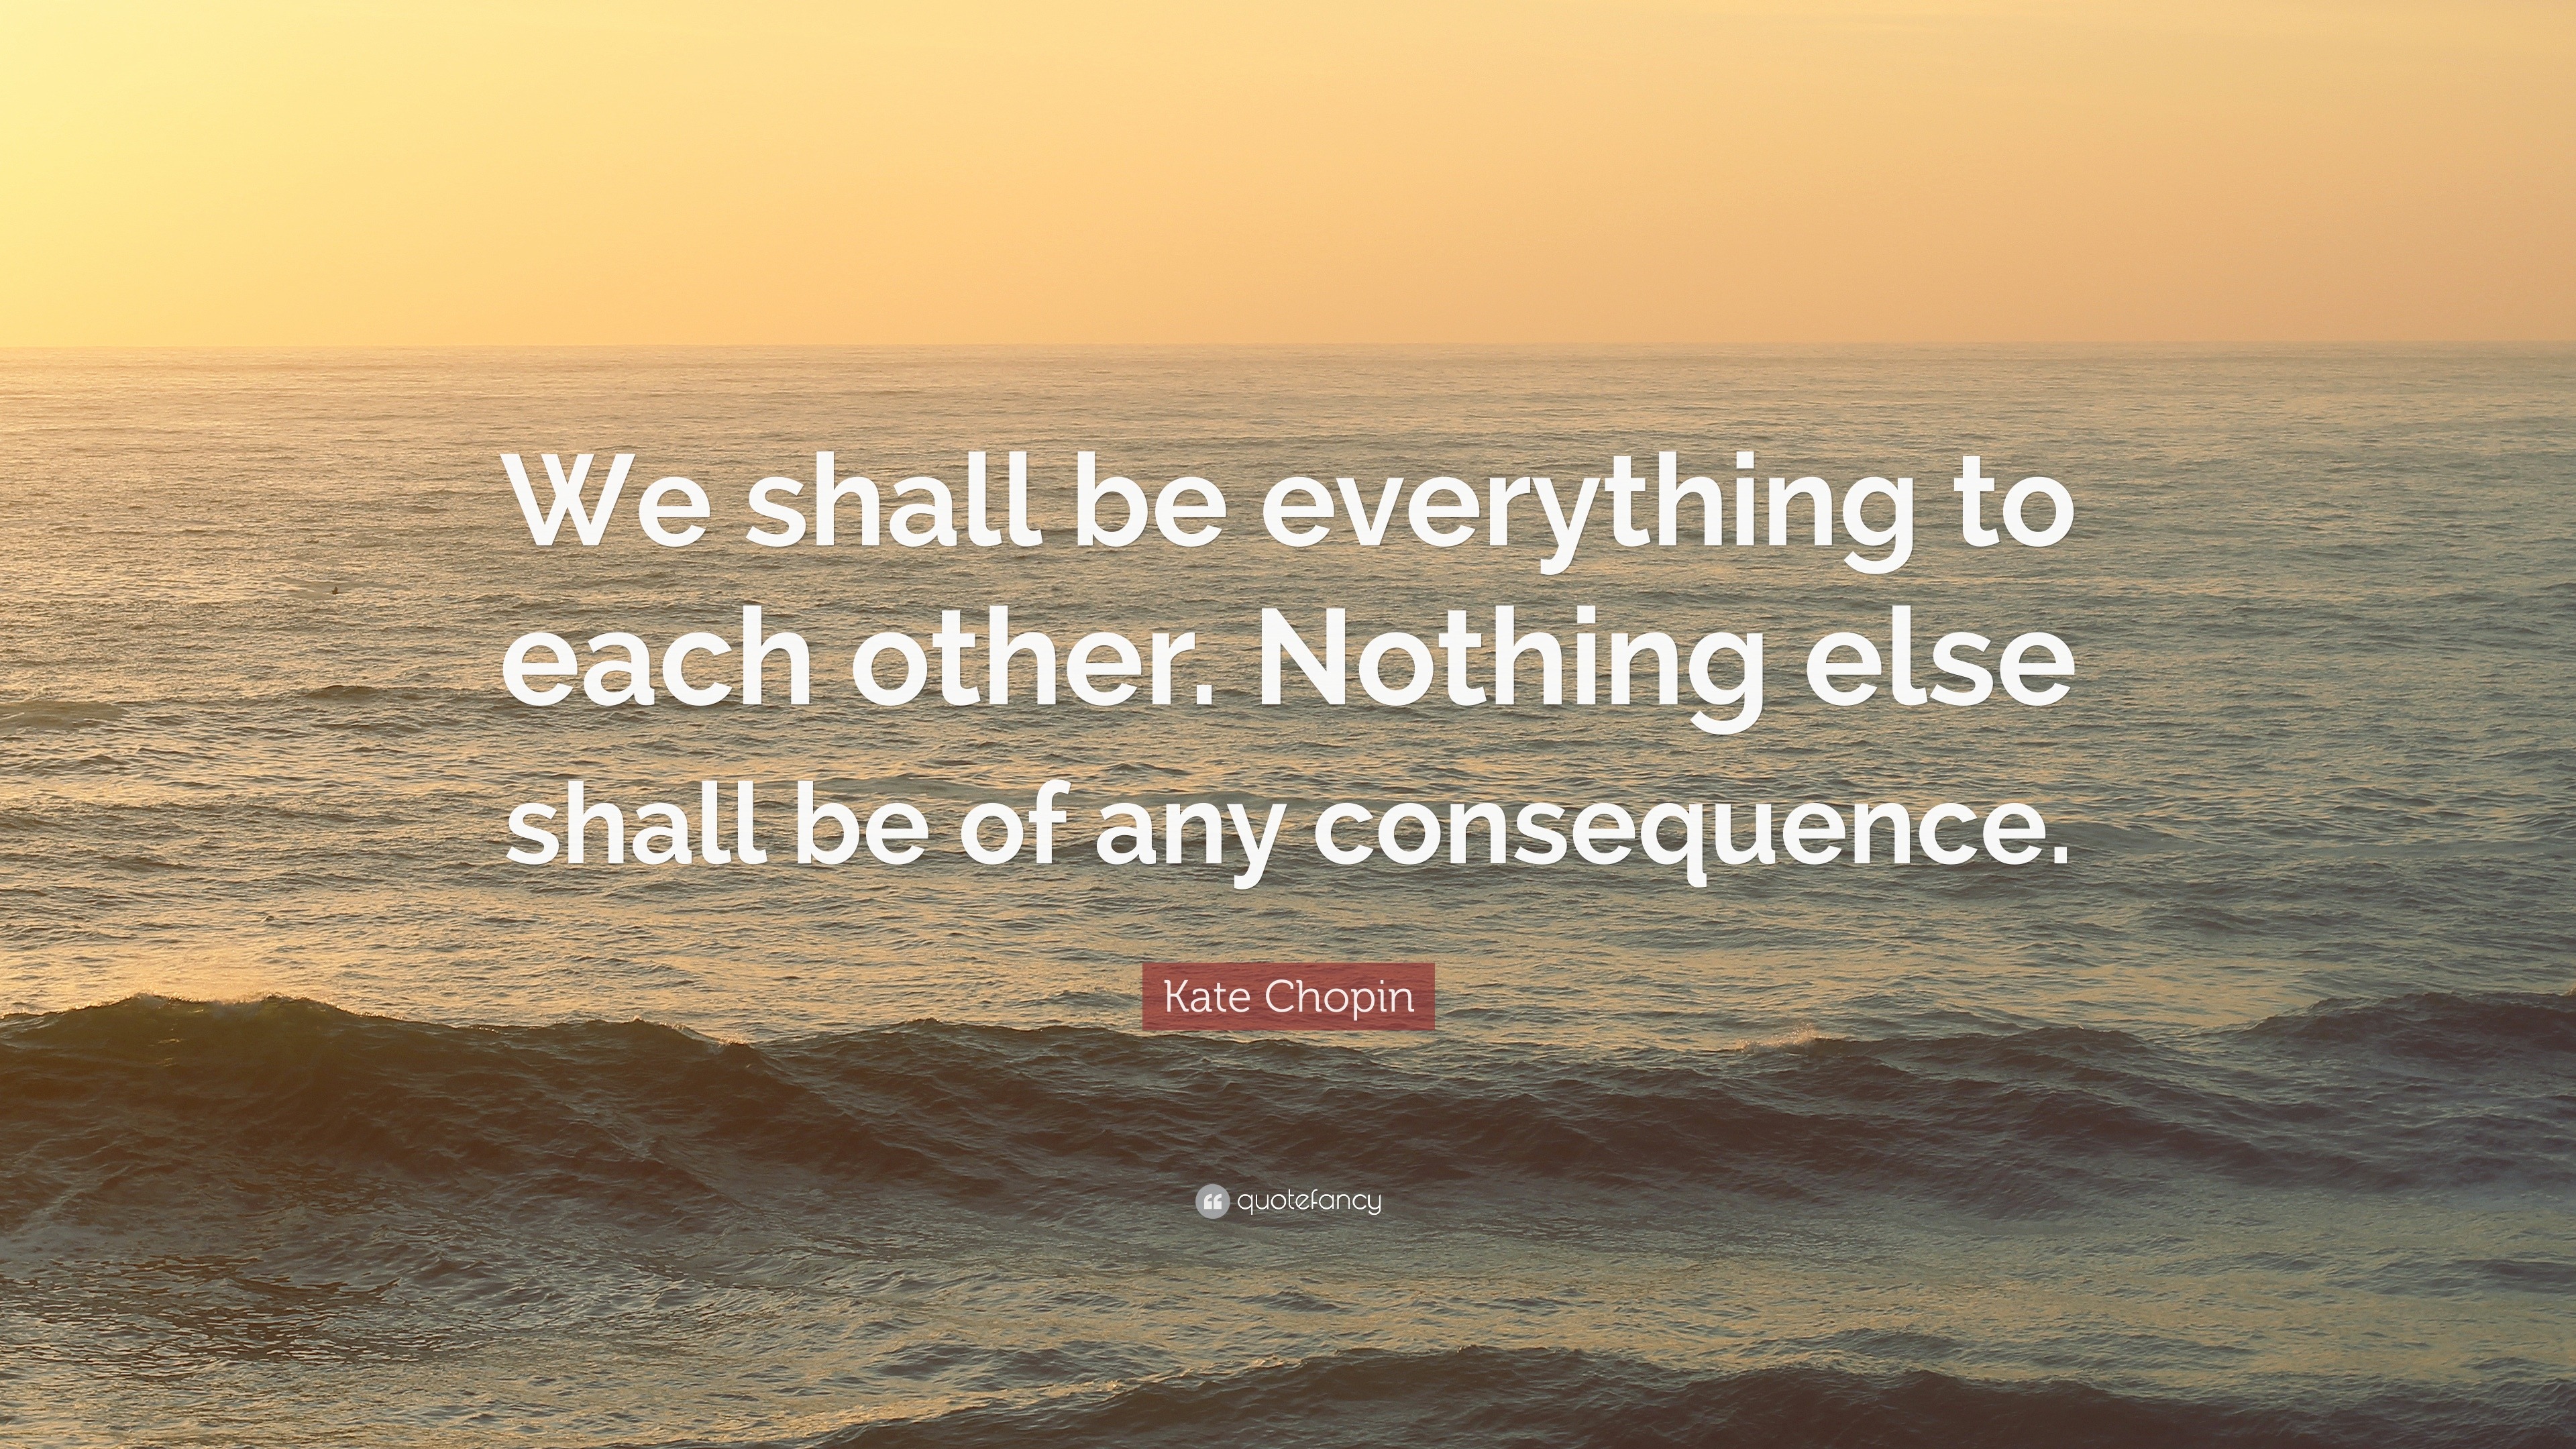 Kate Chopin Quote “We shall be everything to each other. Nothing else